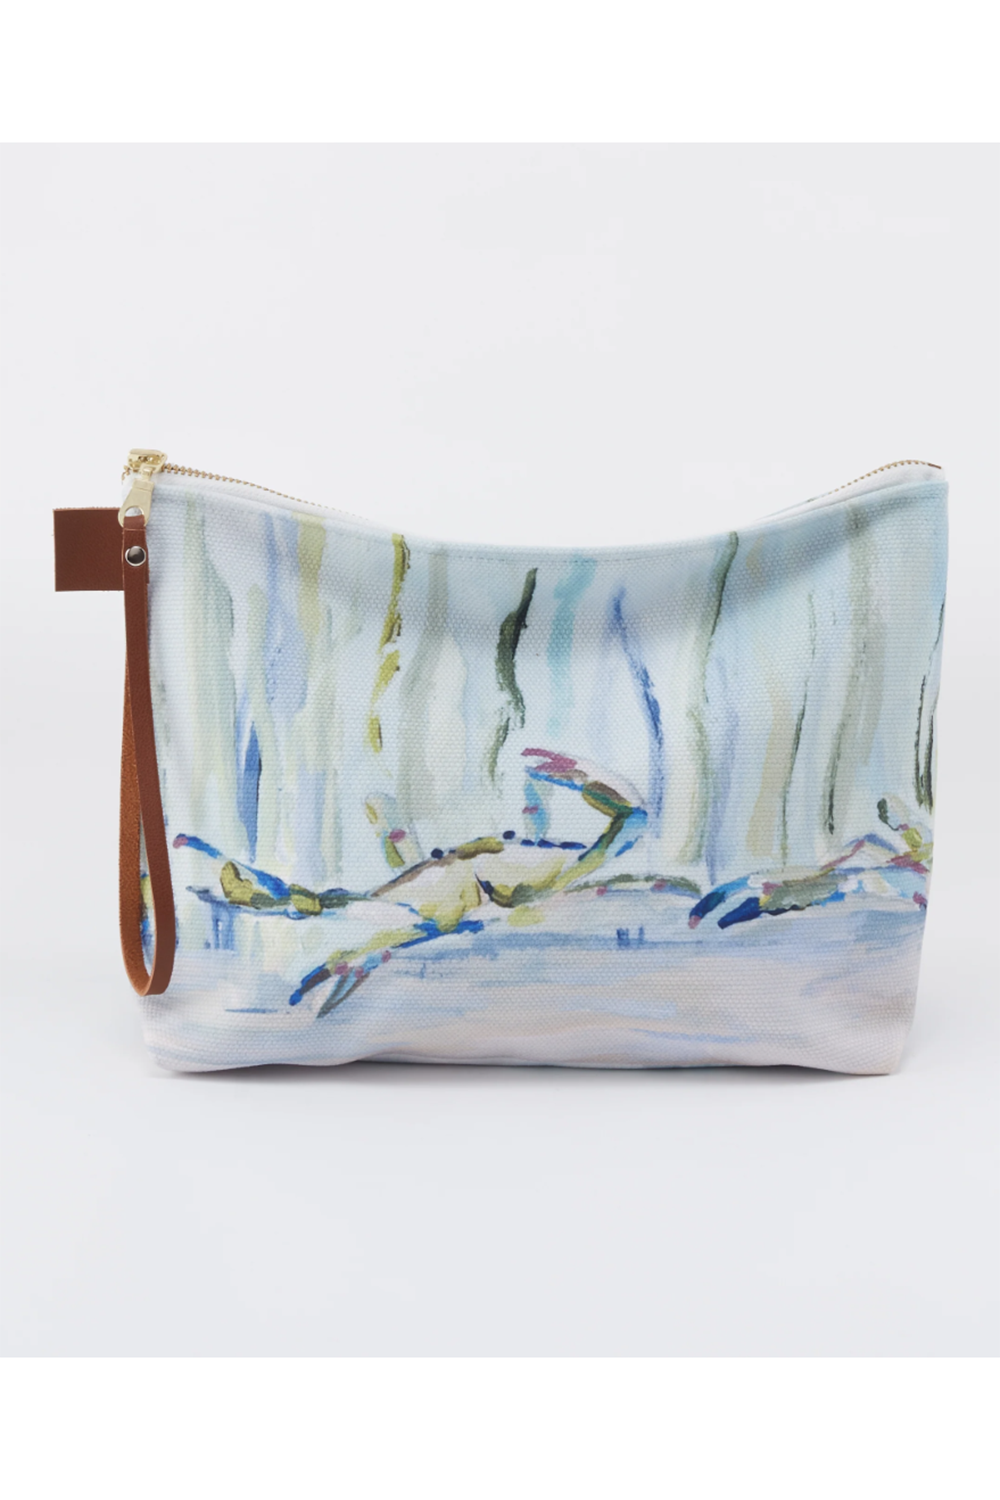 Hovell Cosmetic Bag - Bay Blues